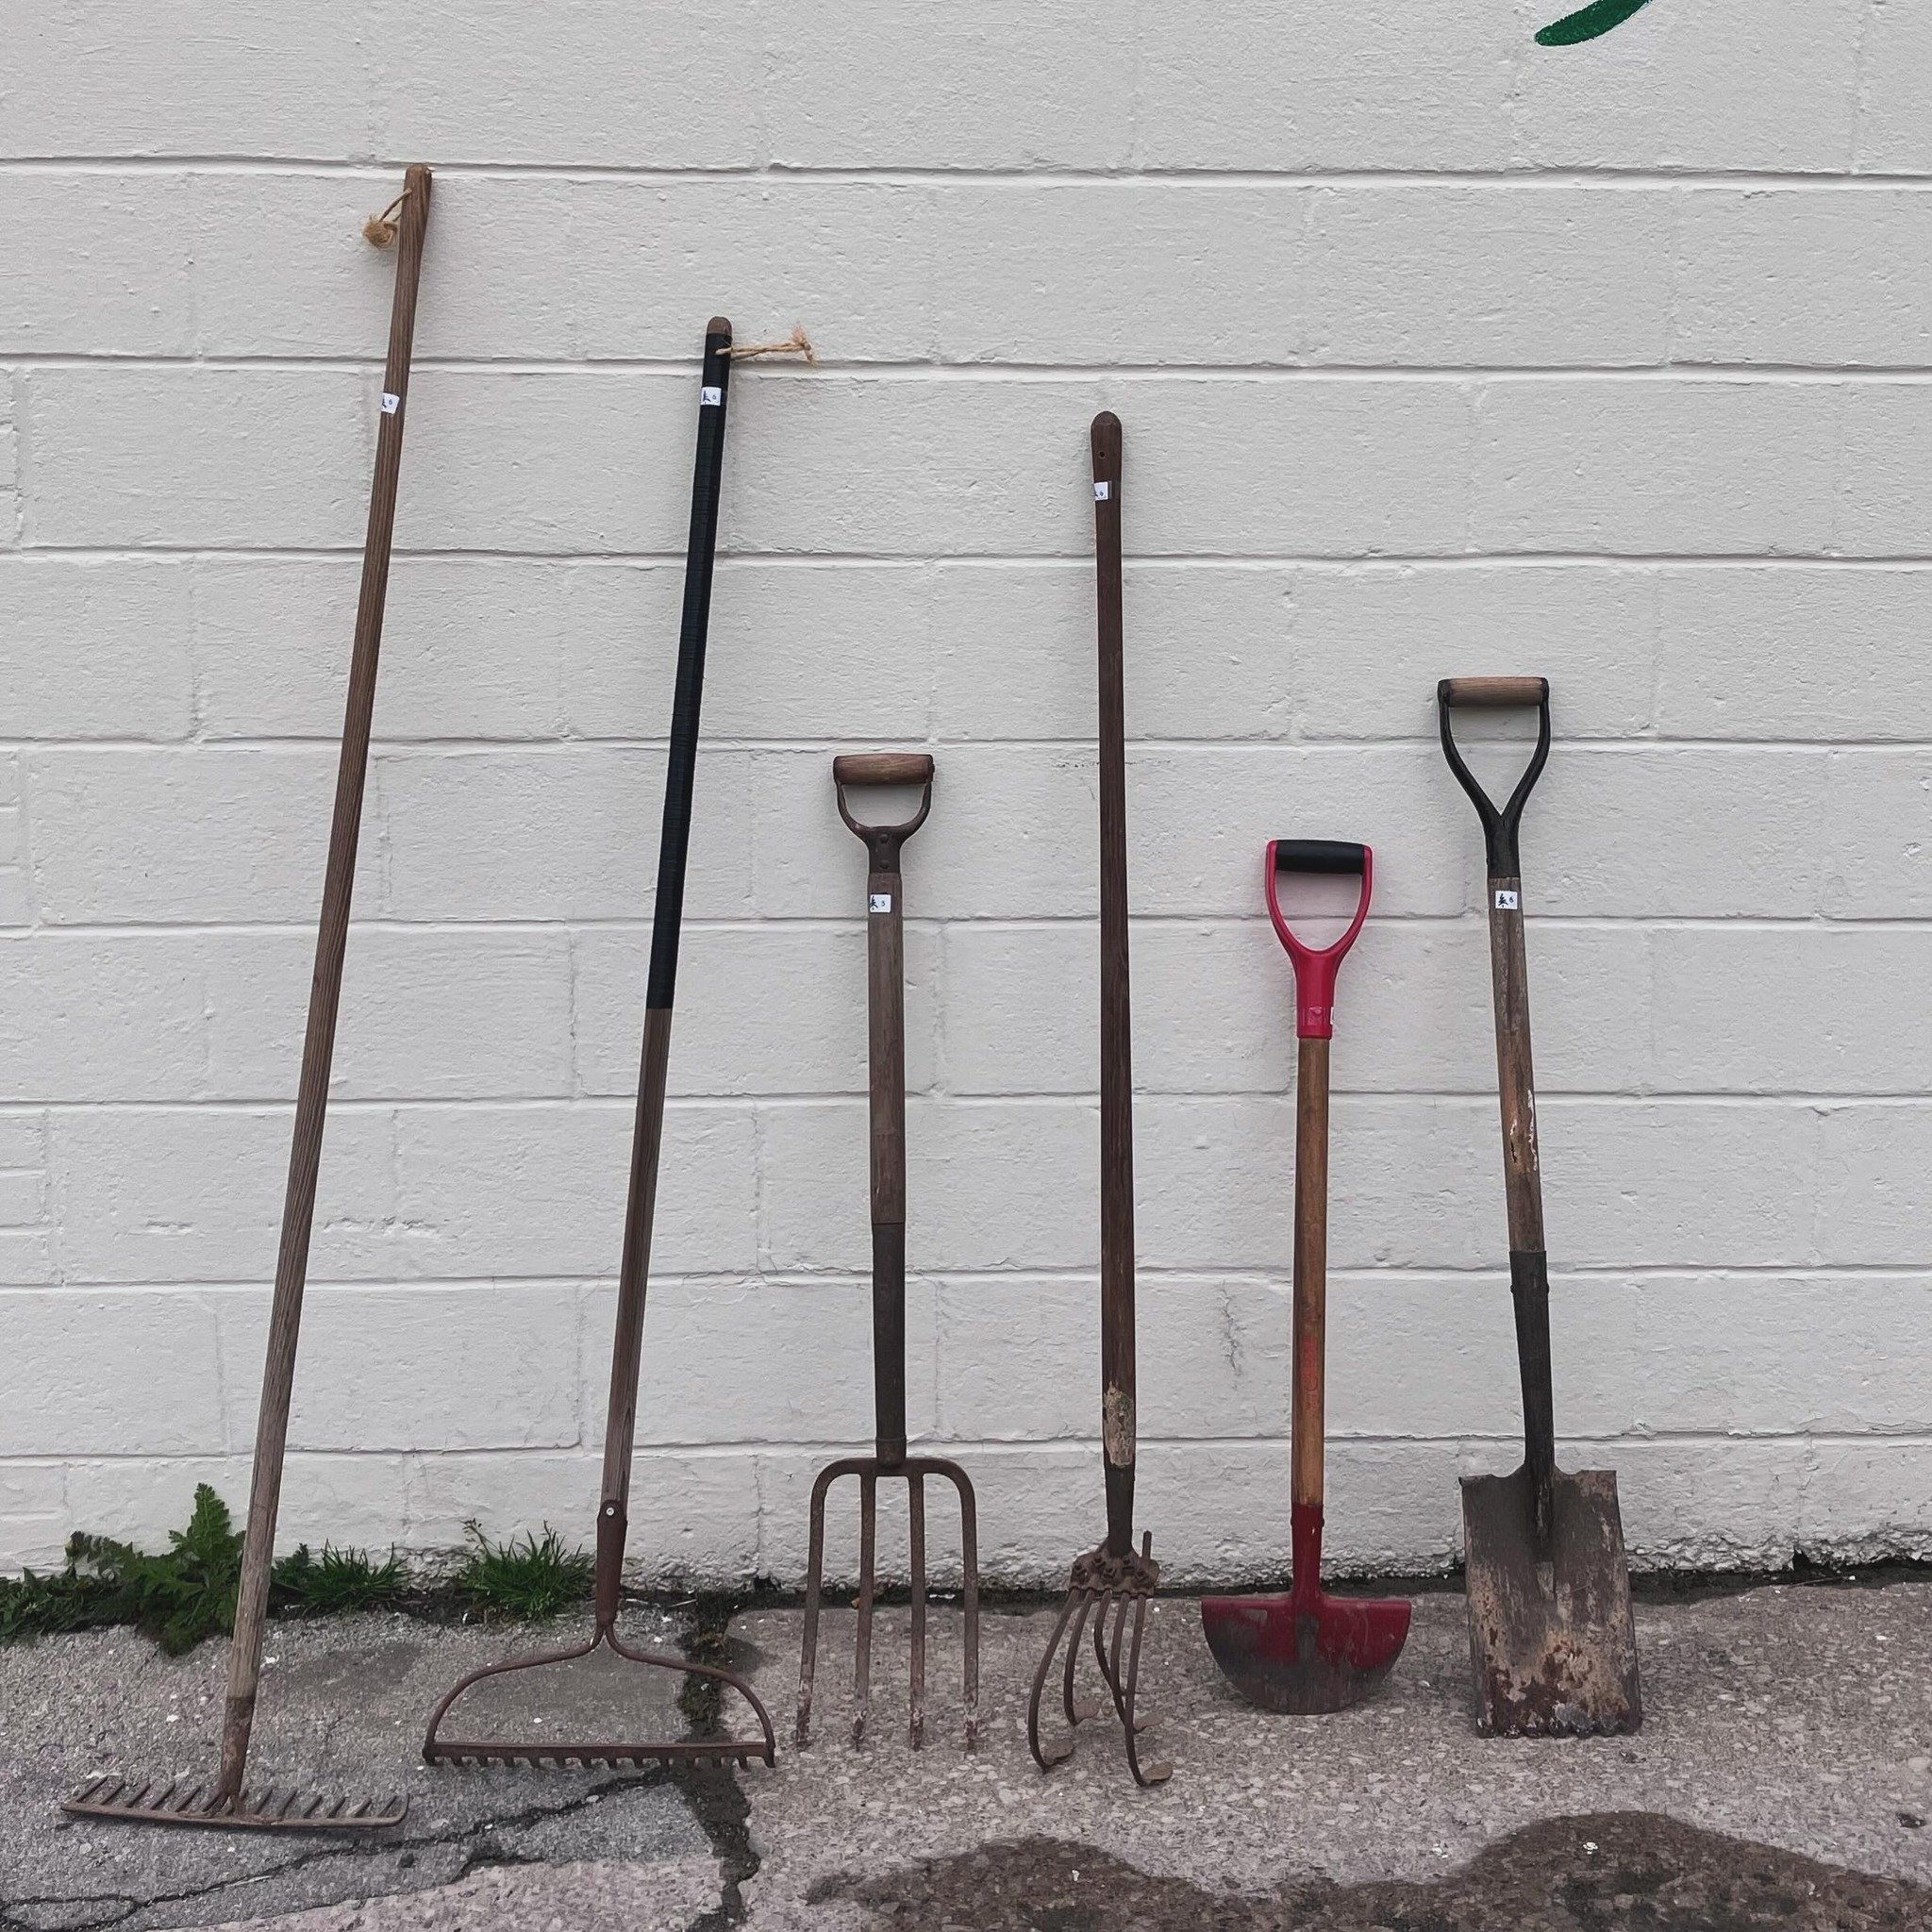 It&rsquo;s spring time. We&rsquo;re bringing out the Garden Tools!

Priced at $5 or $6

One rake and the ground tiller sold right after I took the photo.

🌲

#thriftstore #secondhand #niagarafalls #shoplocal